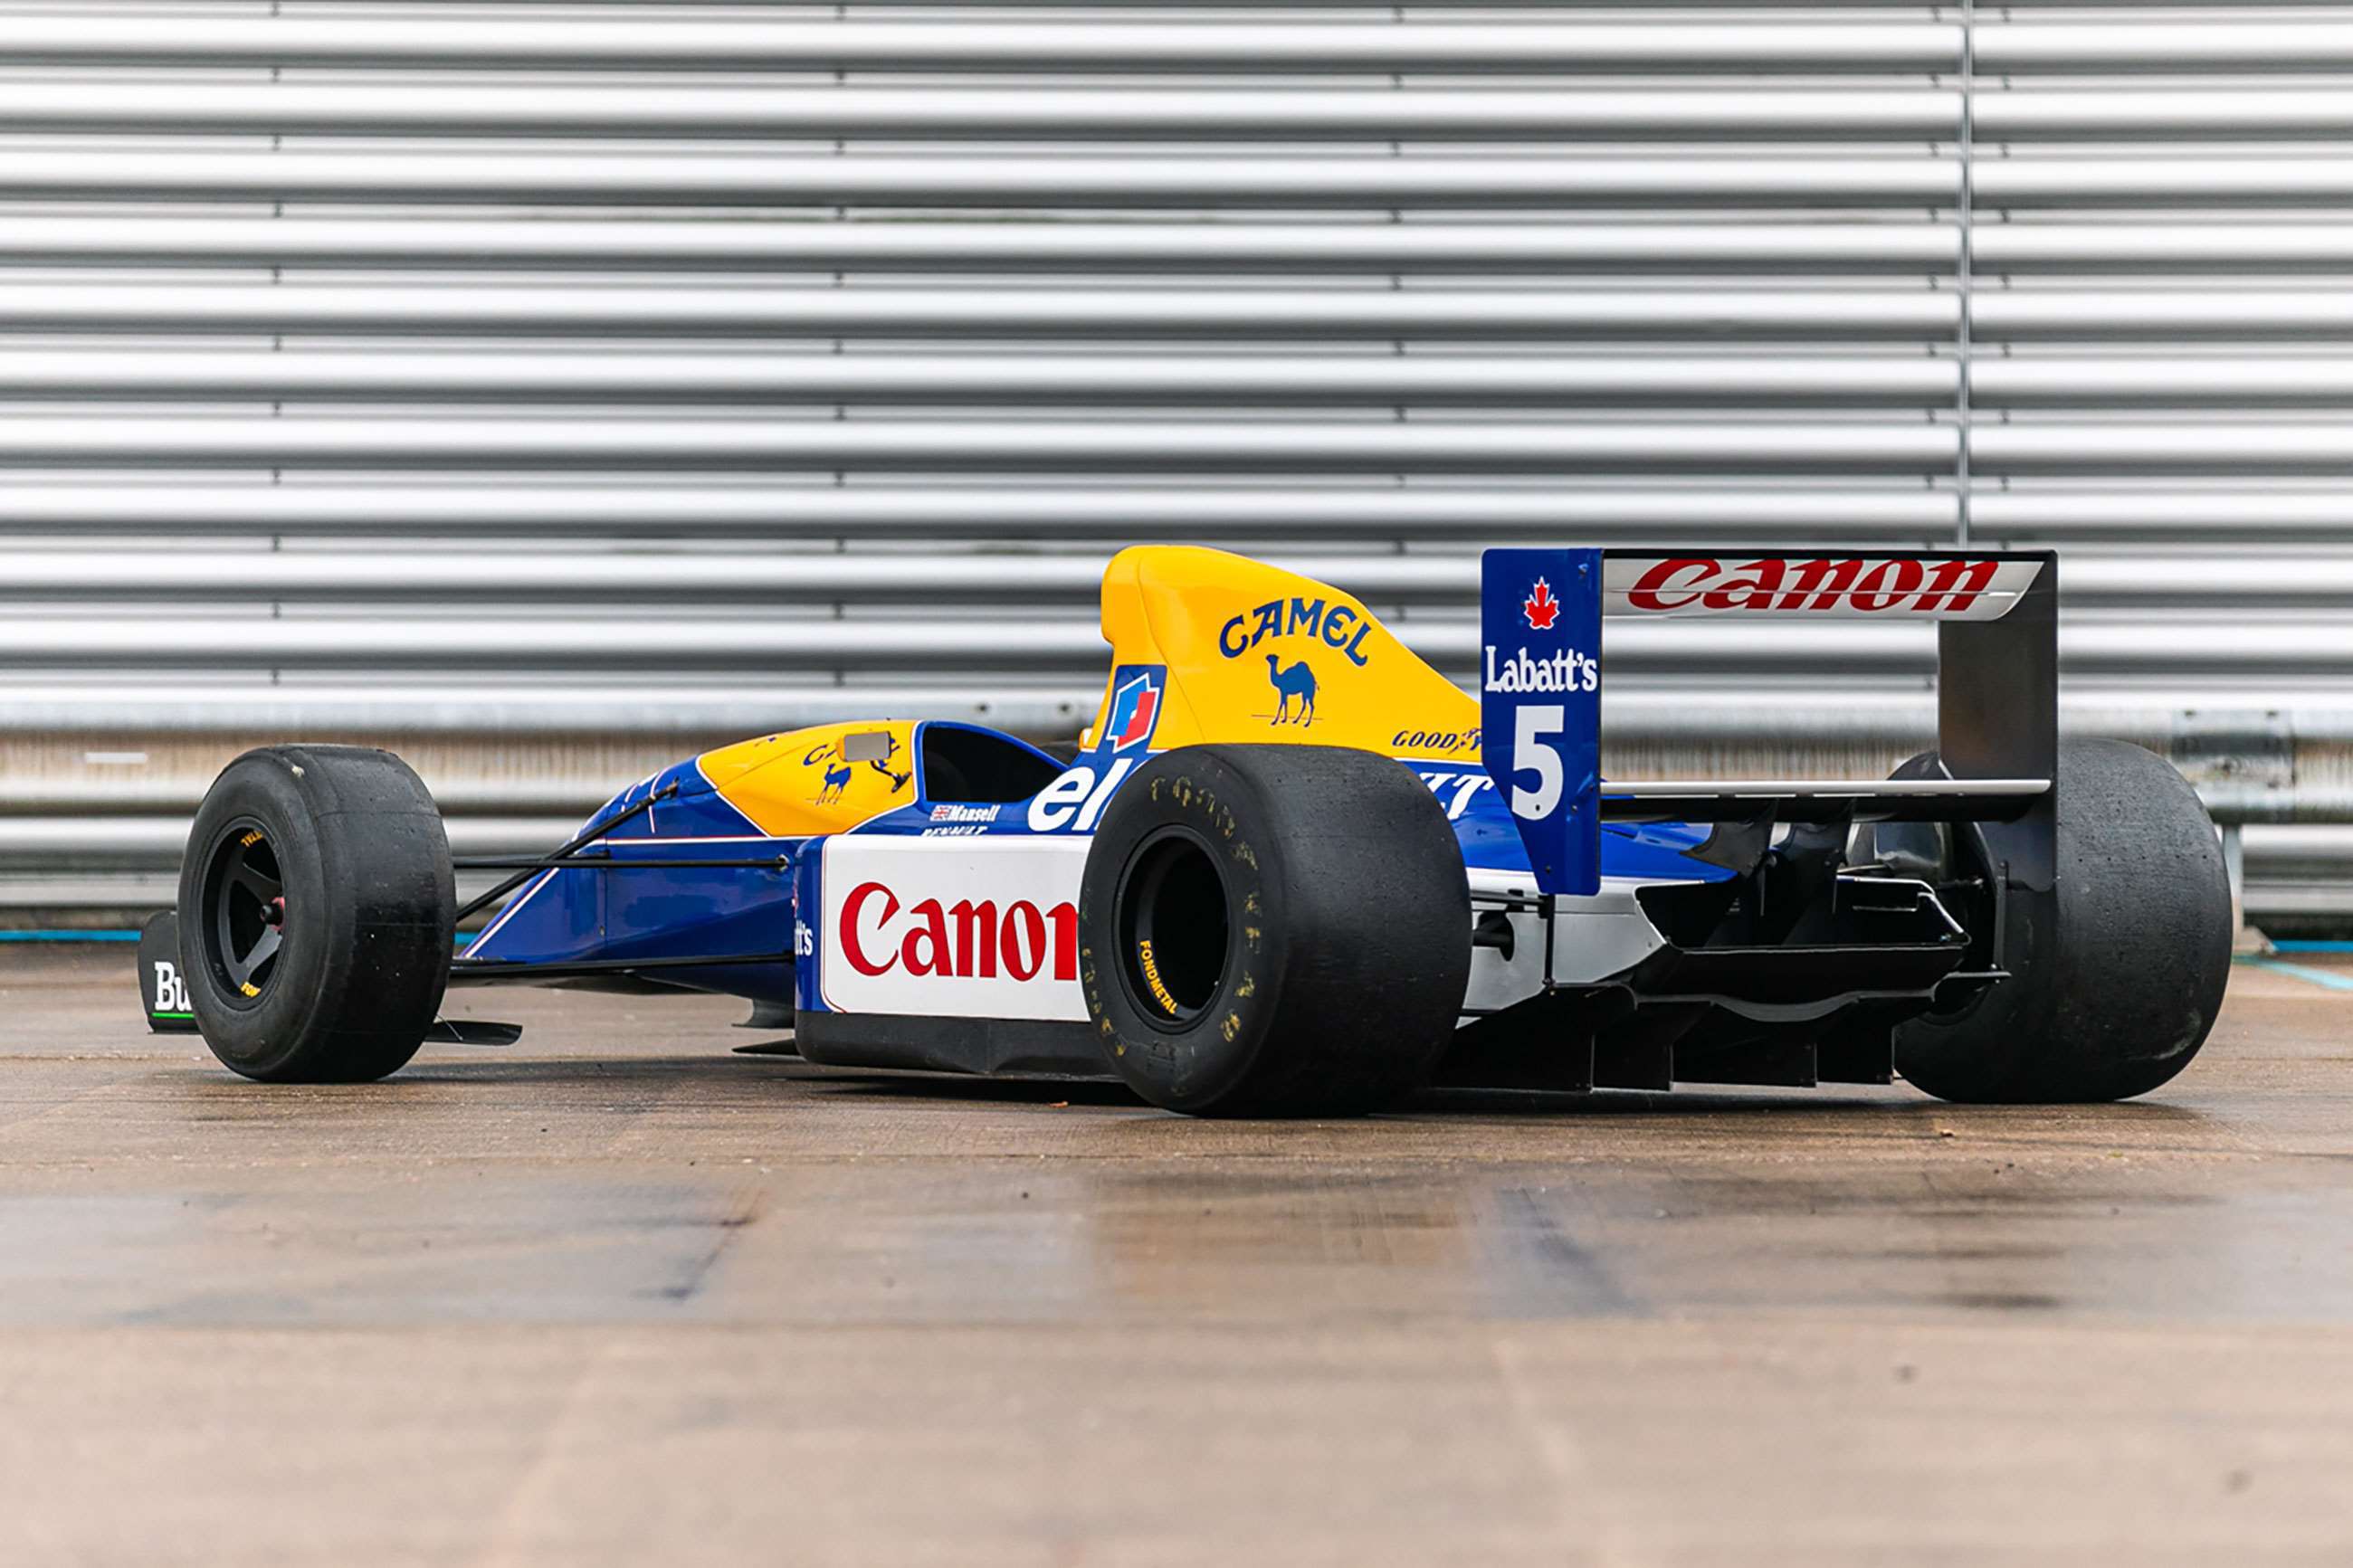 williams-fw14-show-car-for-sale-silverstone-auctions-goodwood-04032021.jpg